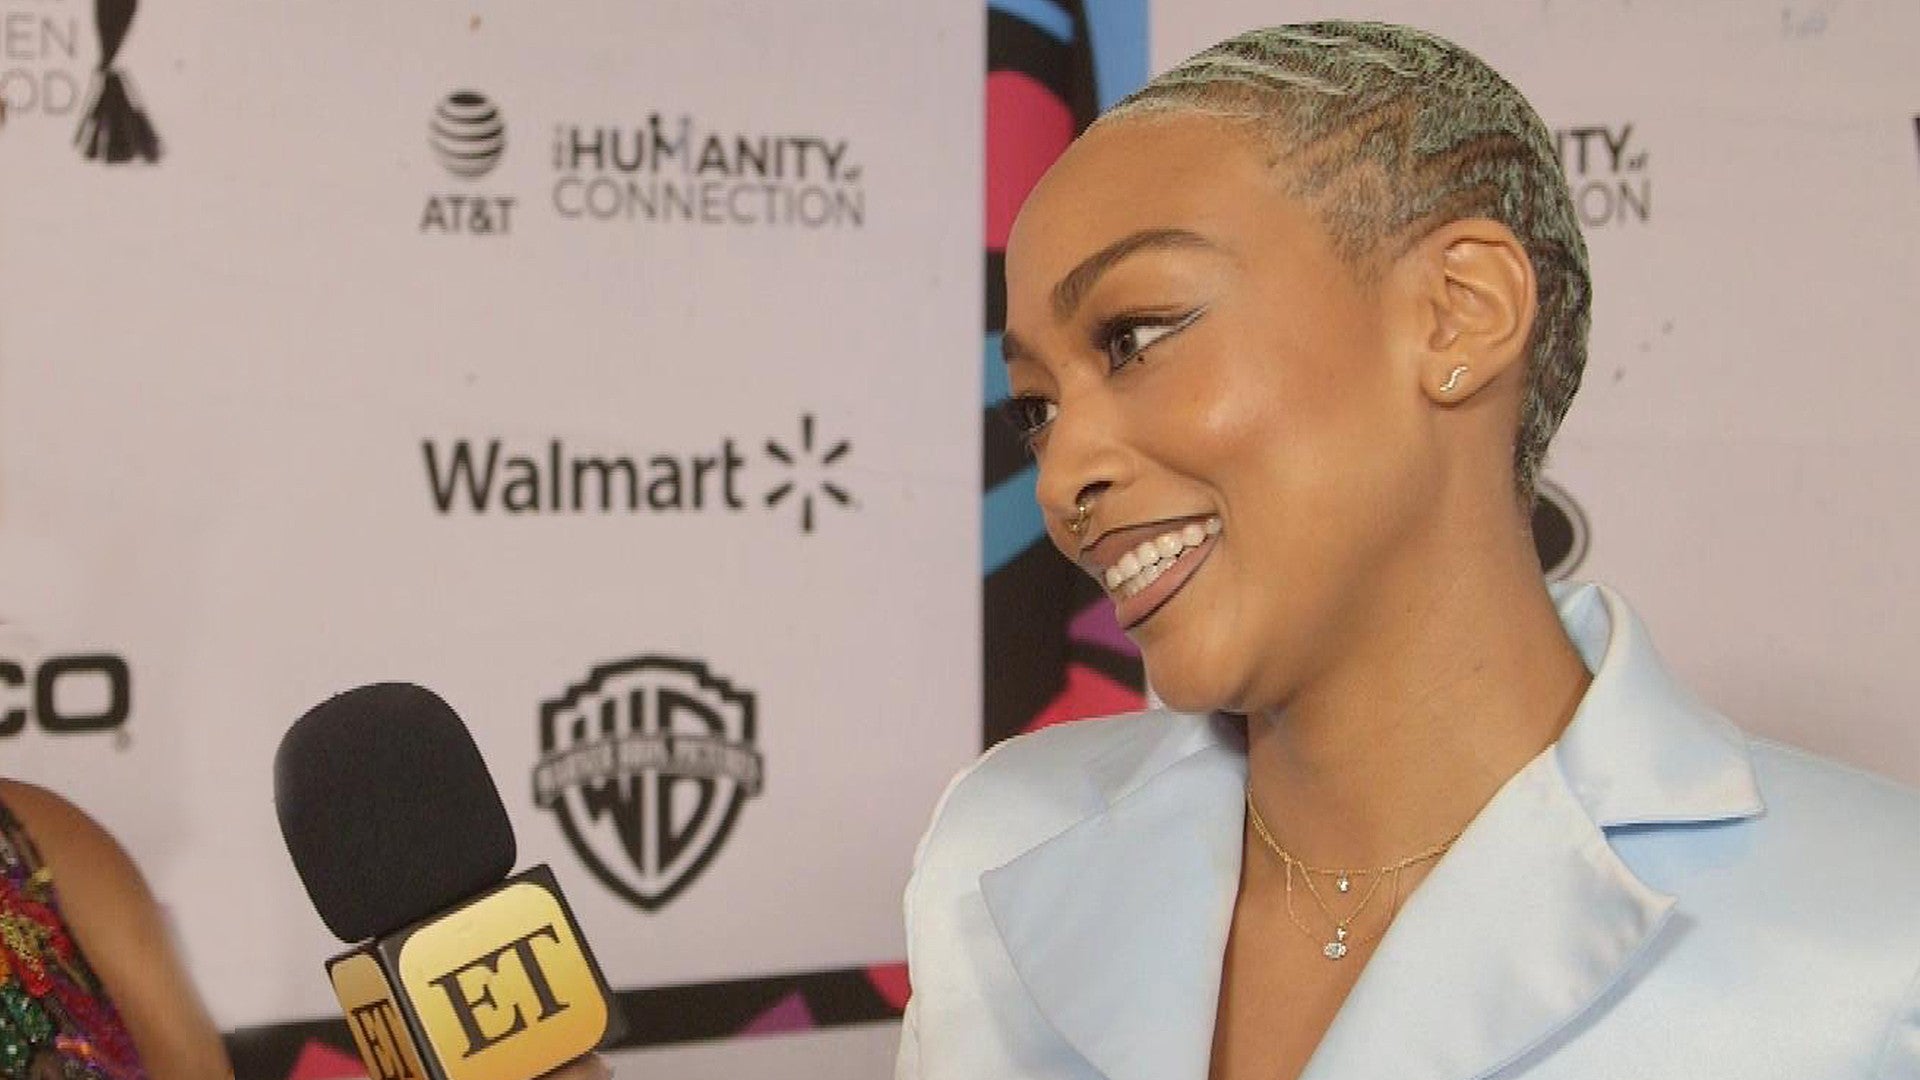 Getting Ready with Tati Gabrielle for the 2022 Academy Awards